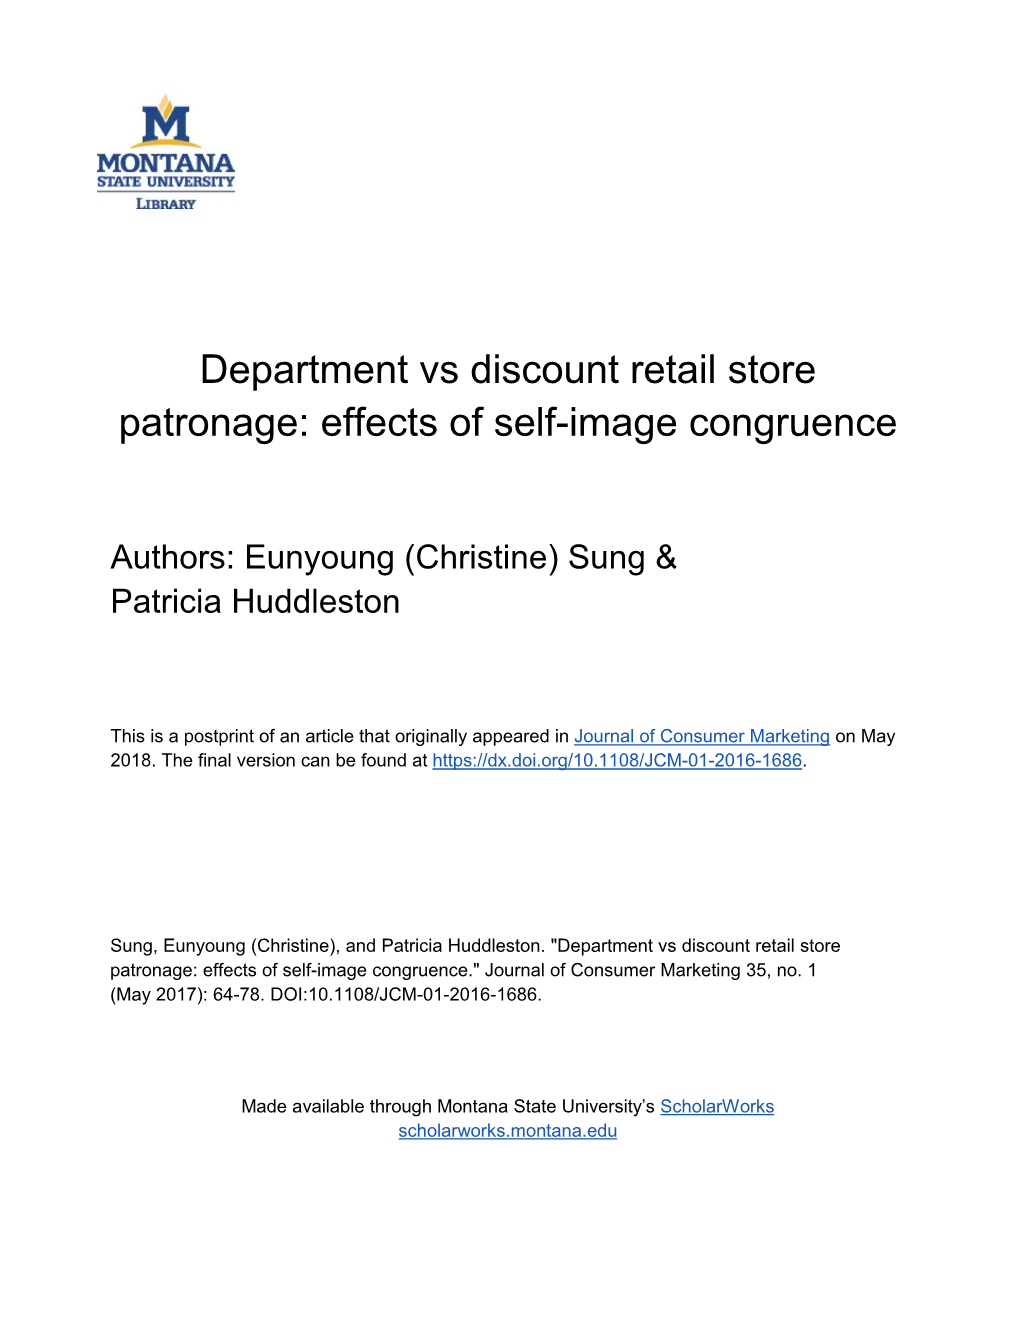 Department Vs Discount Retail Store Patronage: Effects of Self-Image Congruence